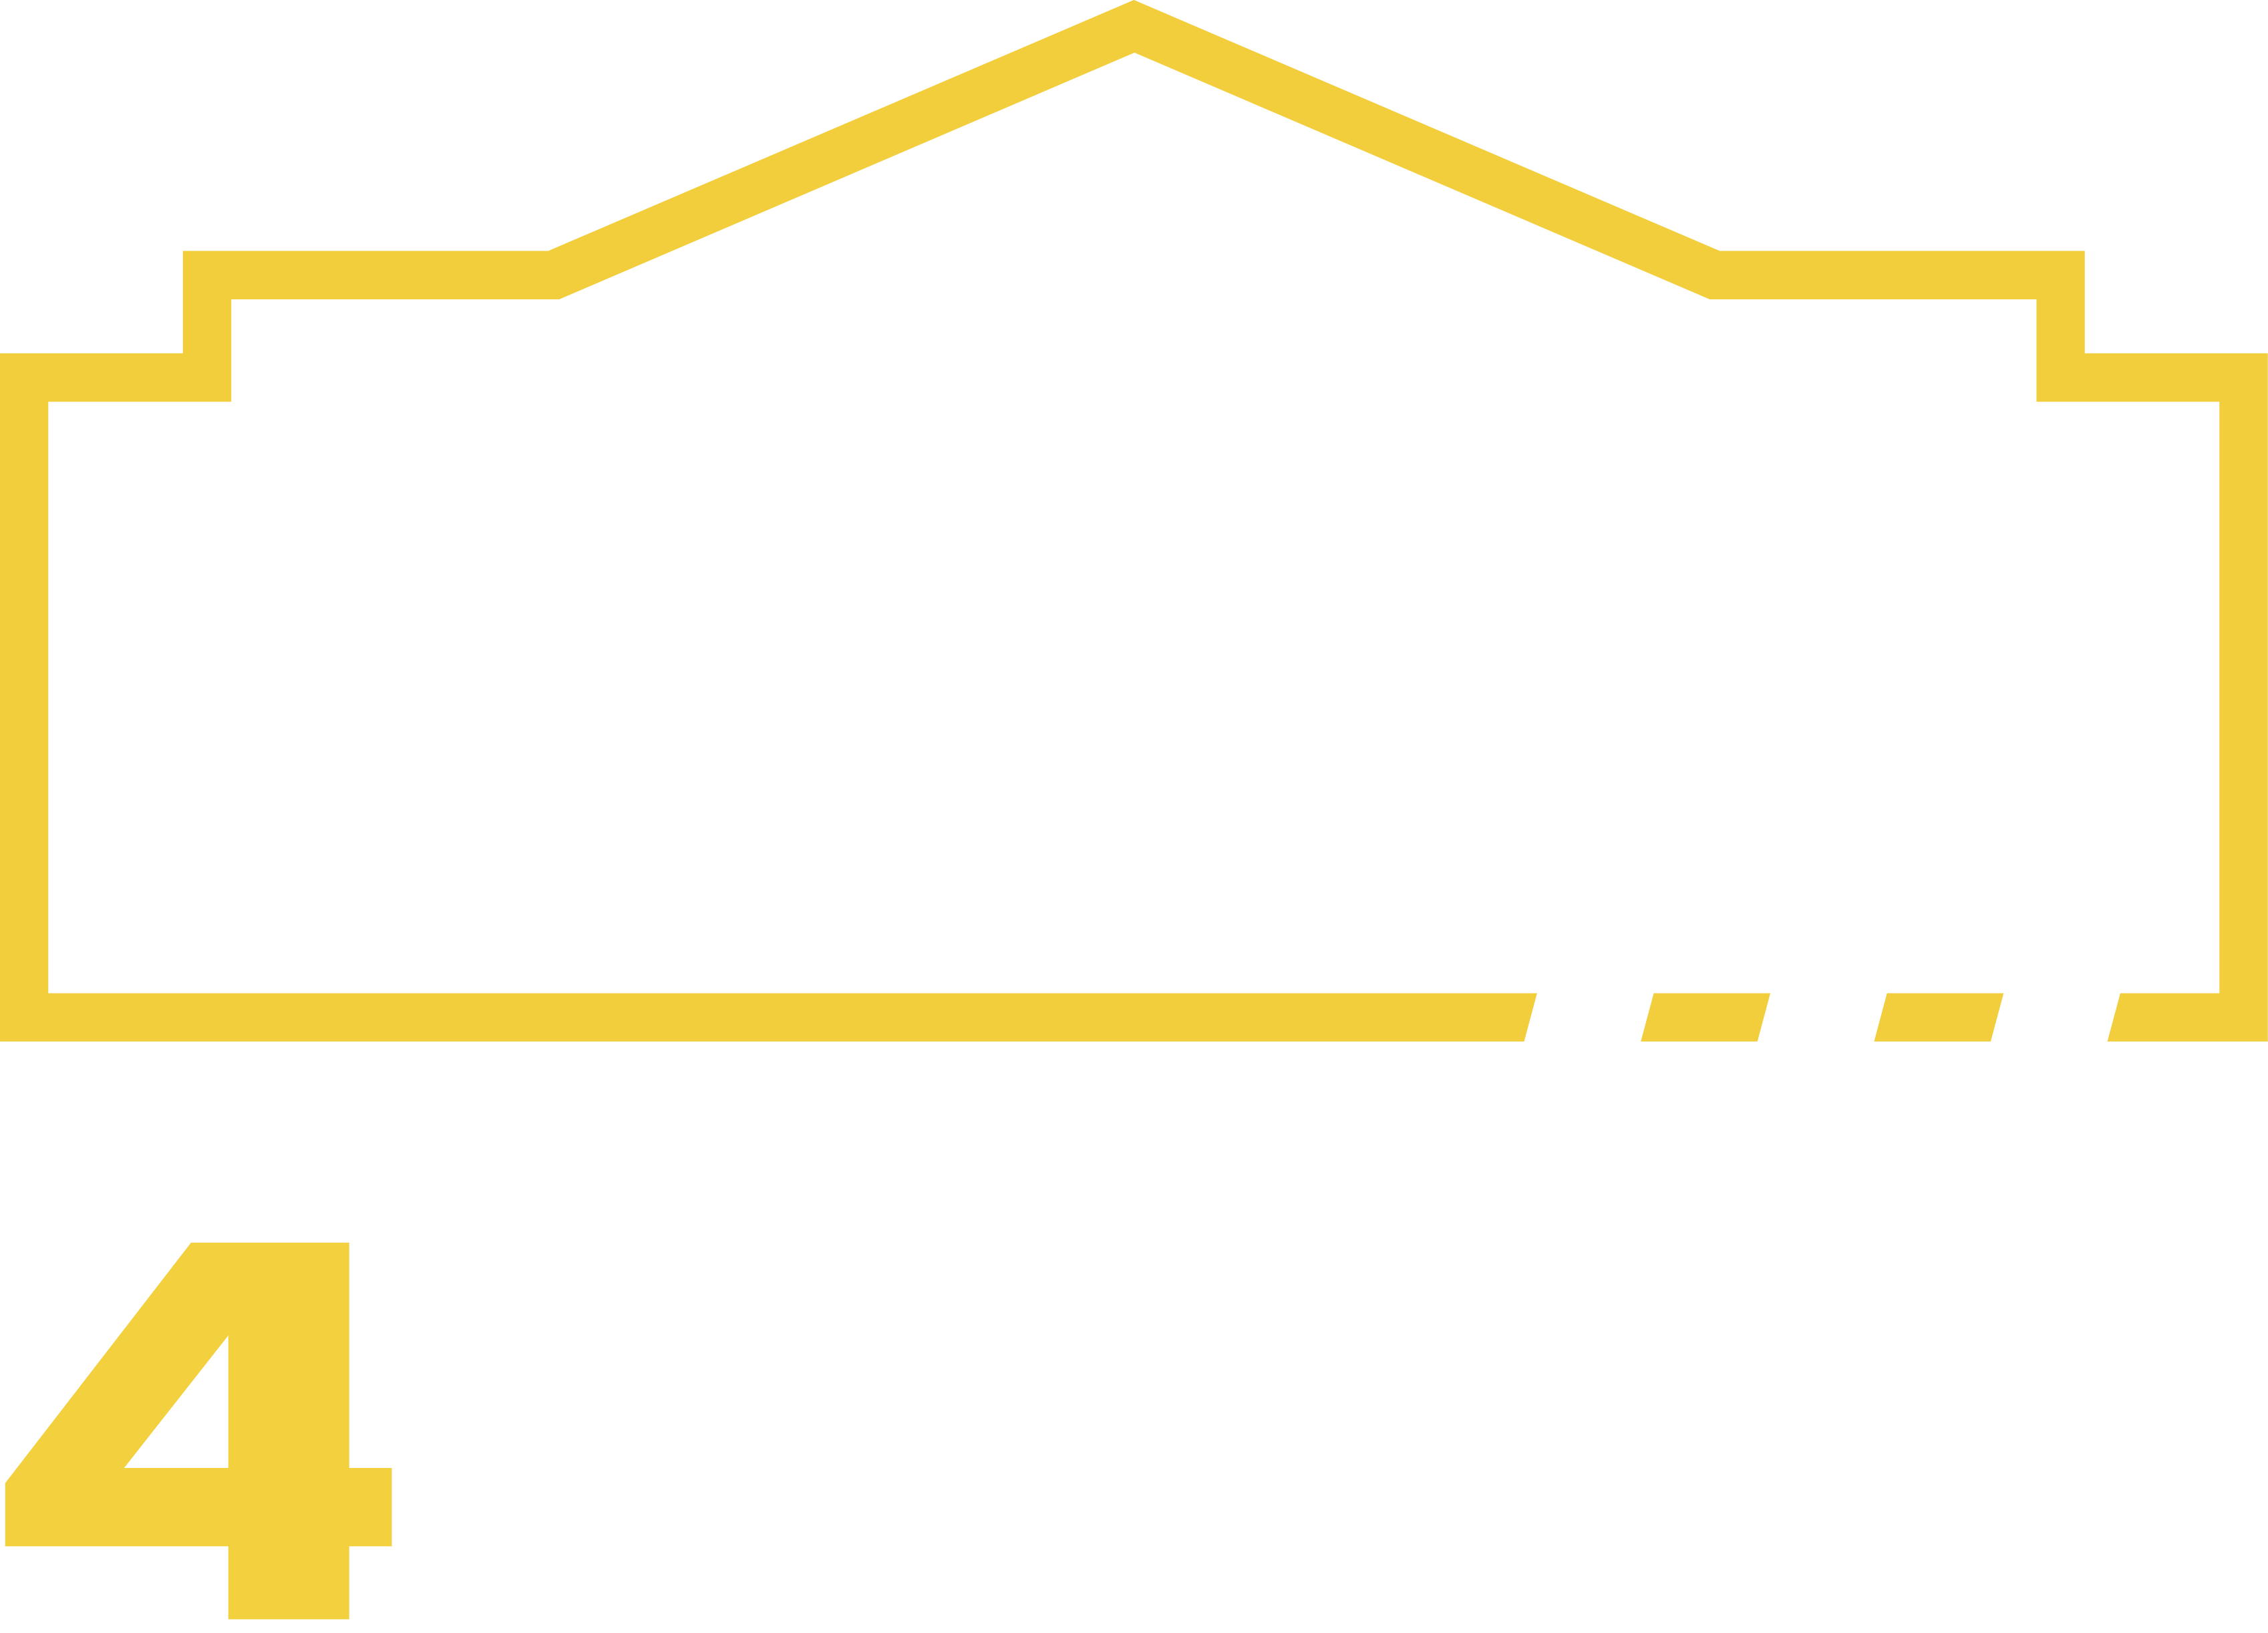 lowes lowes near me